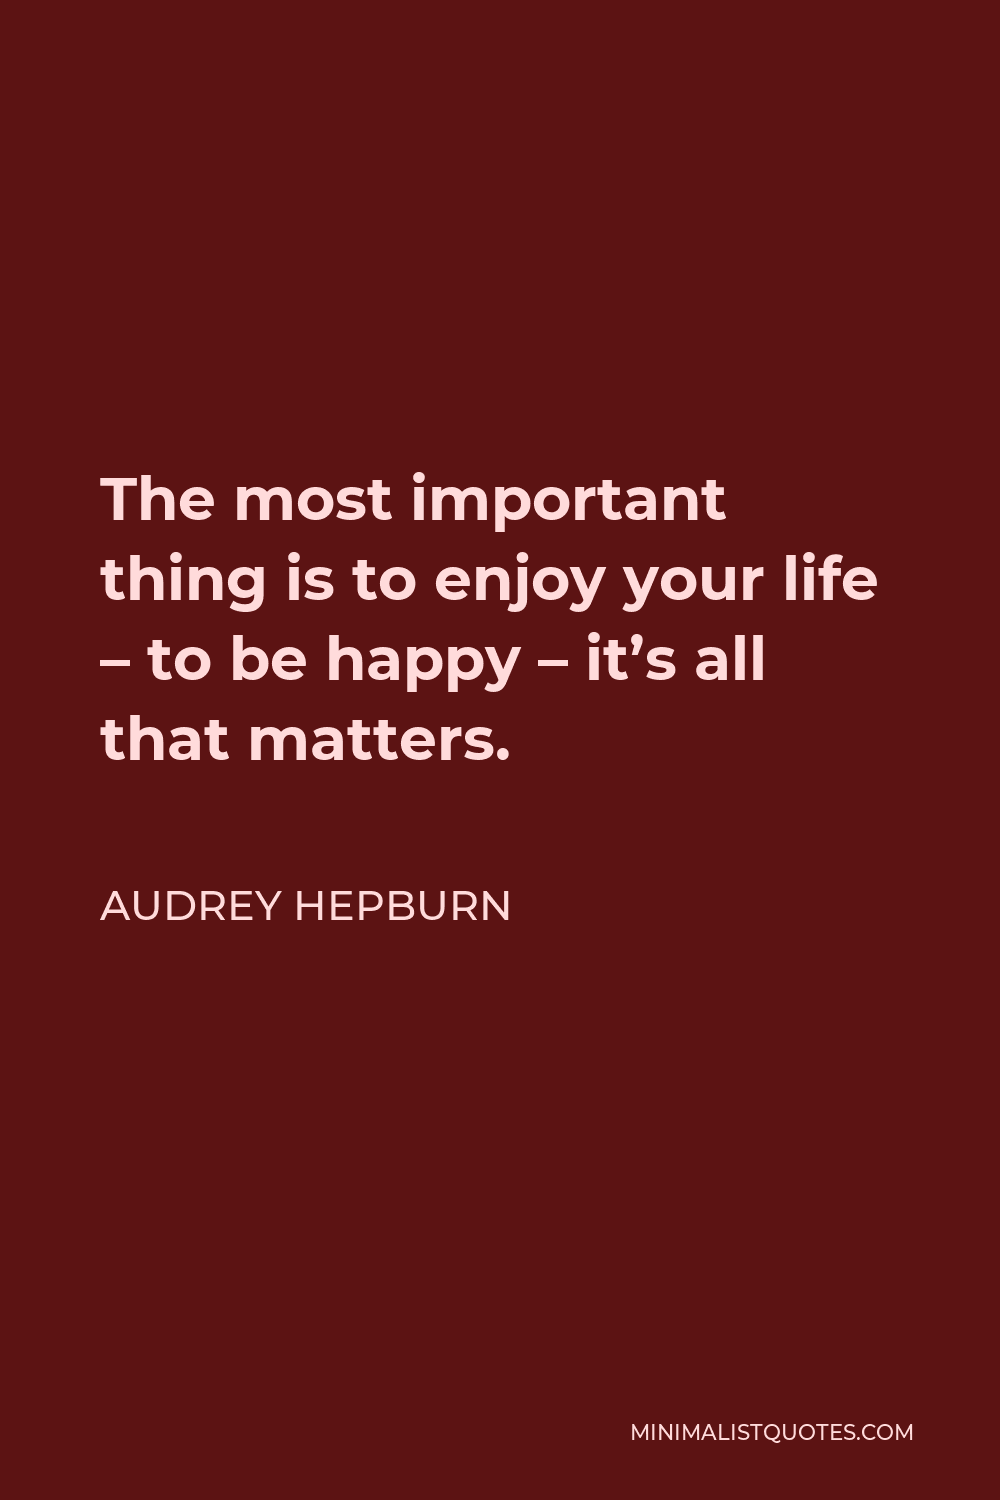 Audrey Hepburn Quote The Most Important Thing Is To Enjoy Your Life To Be Happy It S All That Matters